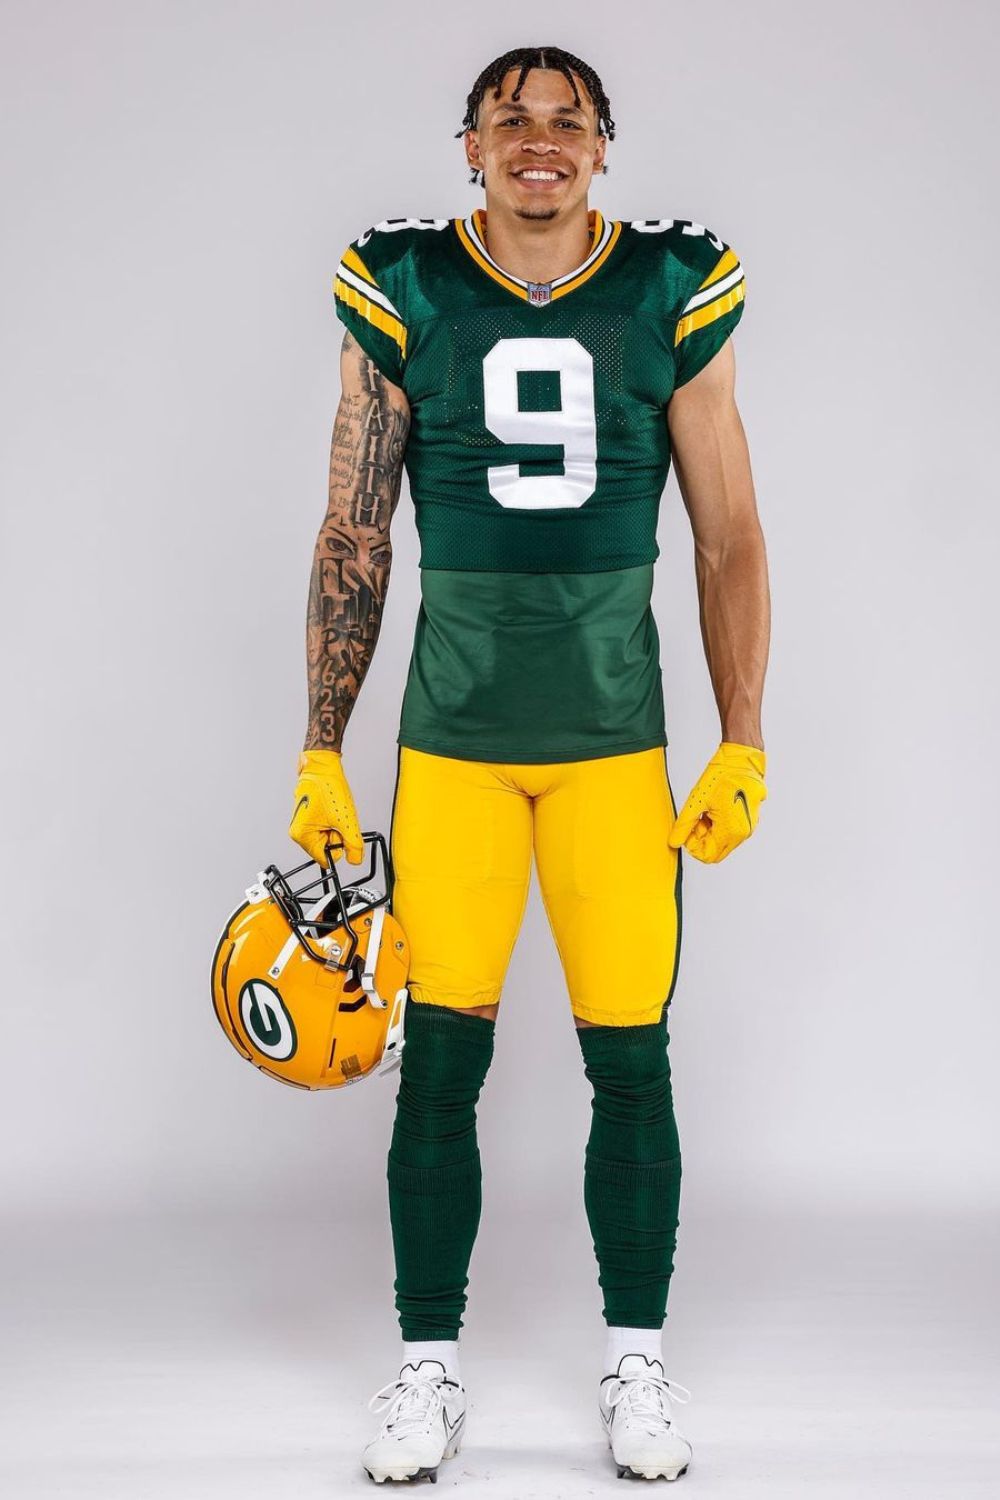 Green Bay Packers Wide Receiver Christian Watson